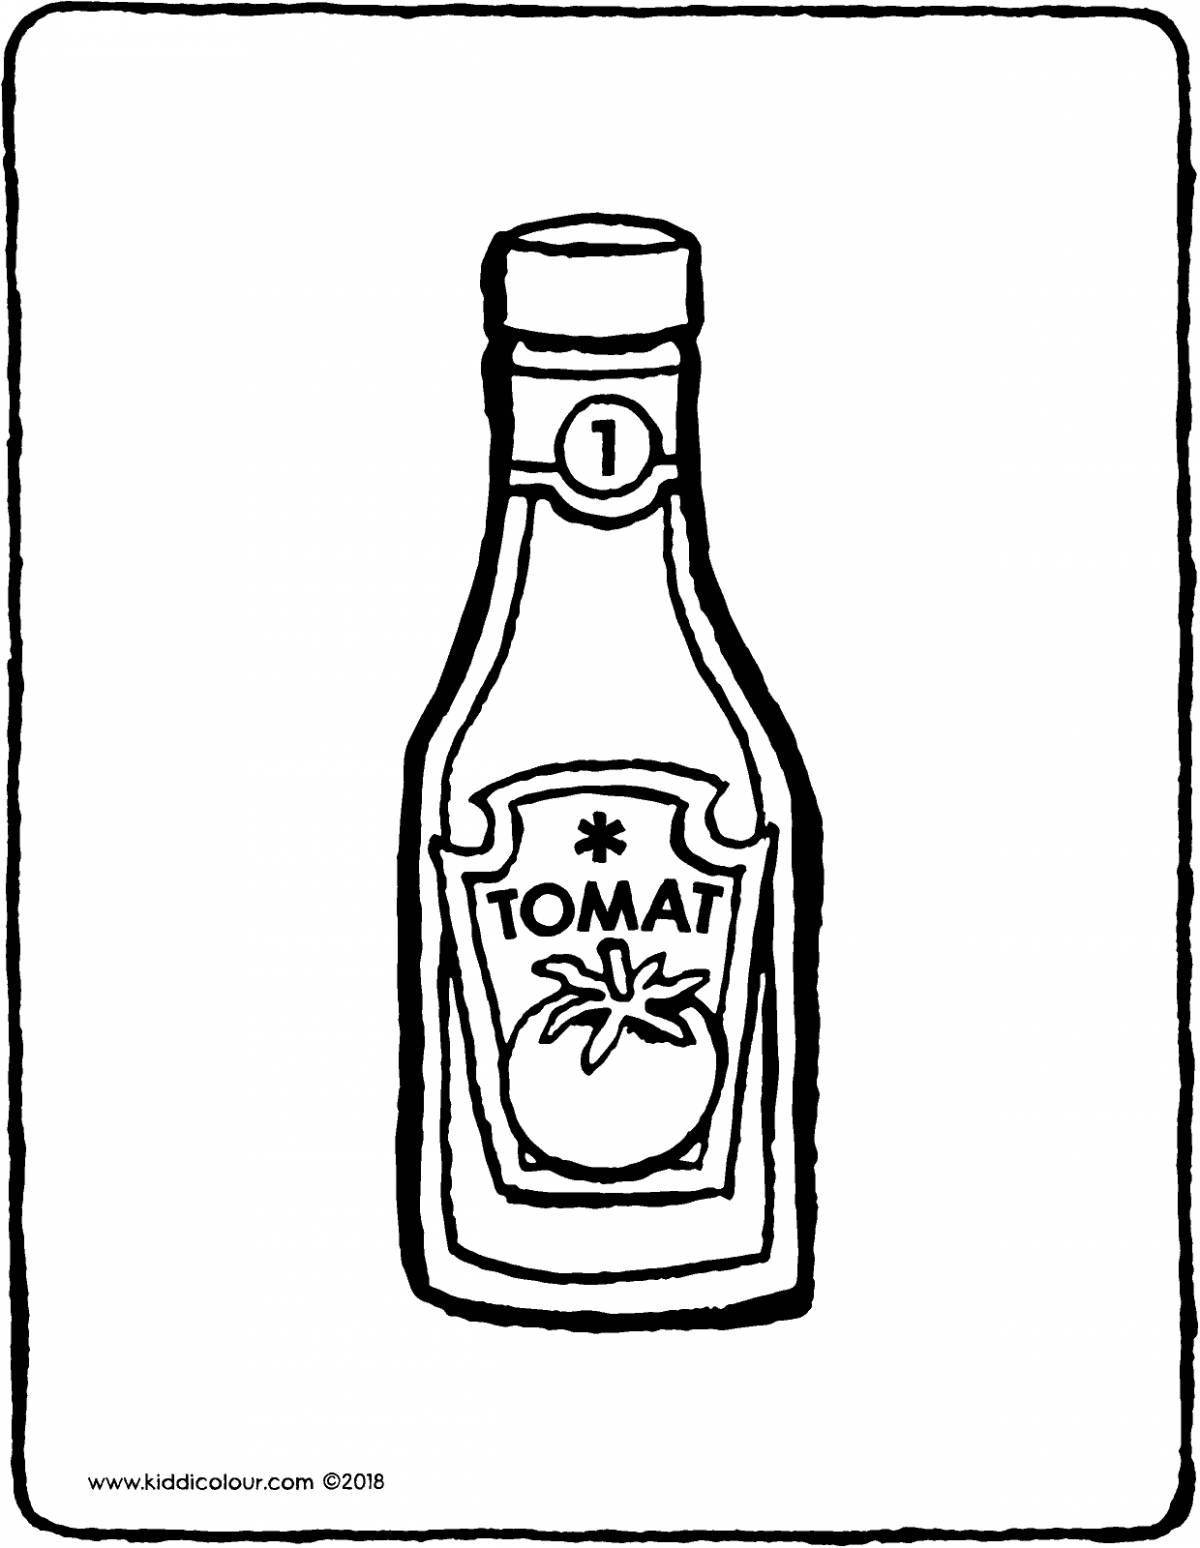 Hot sauce coloring page